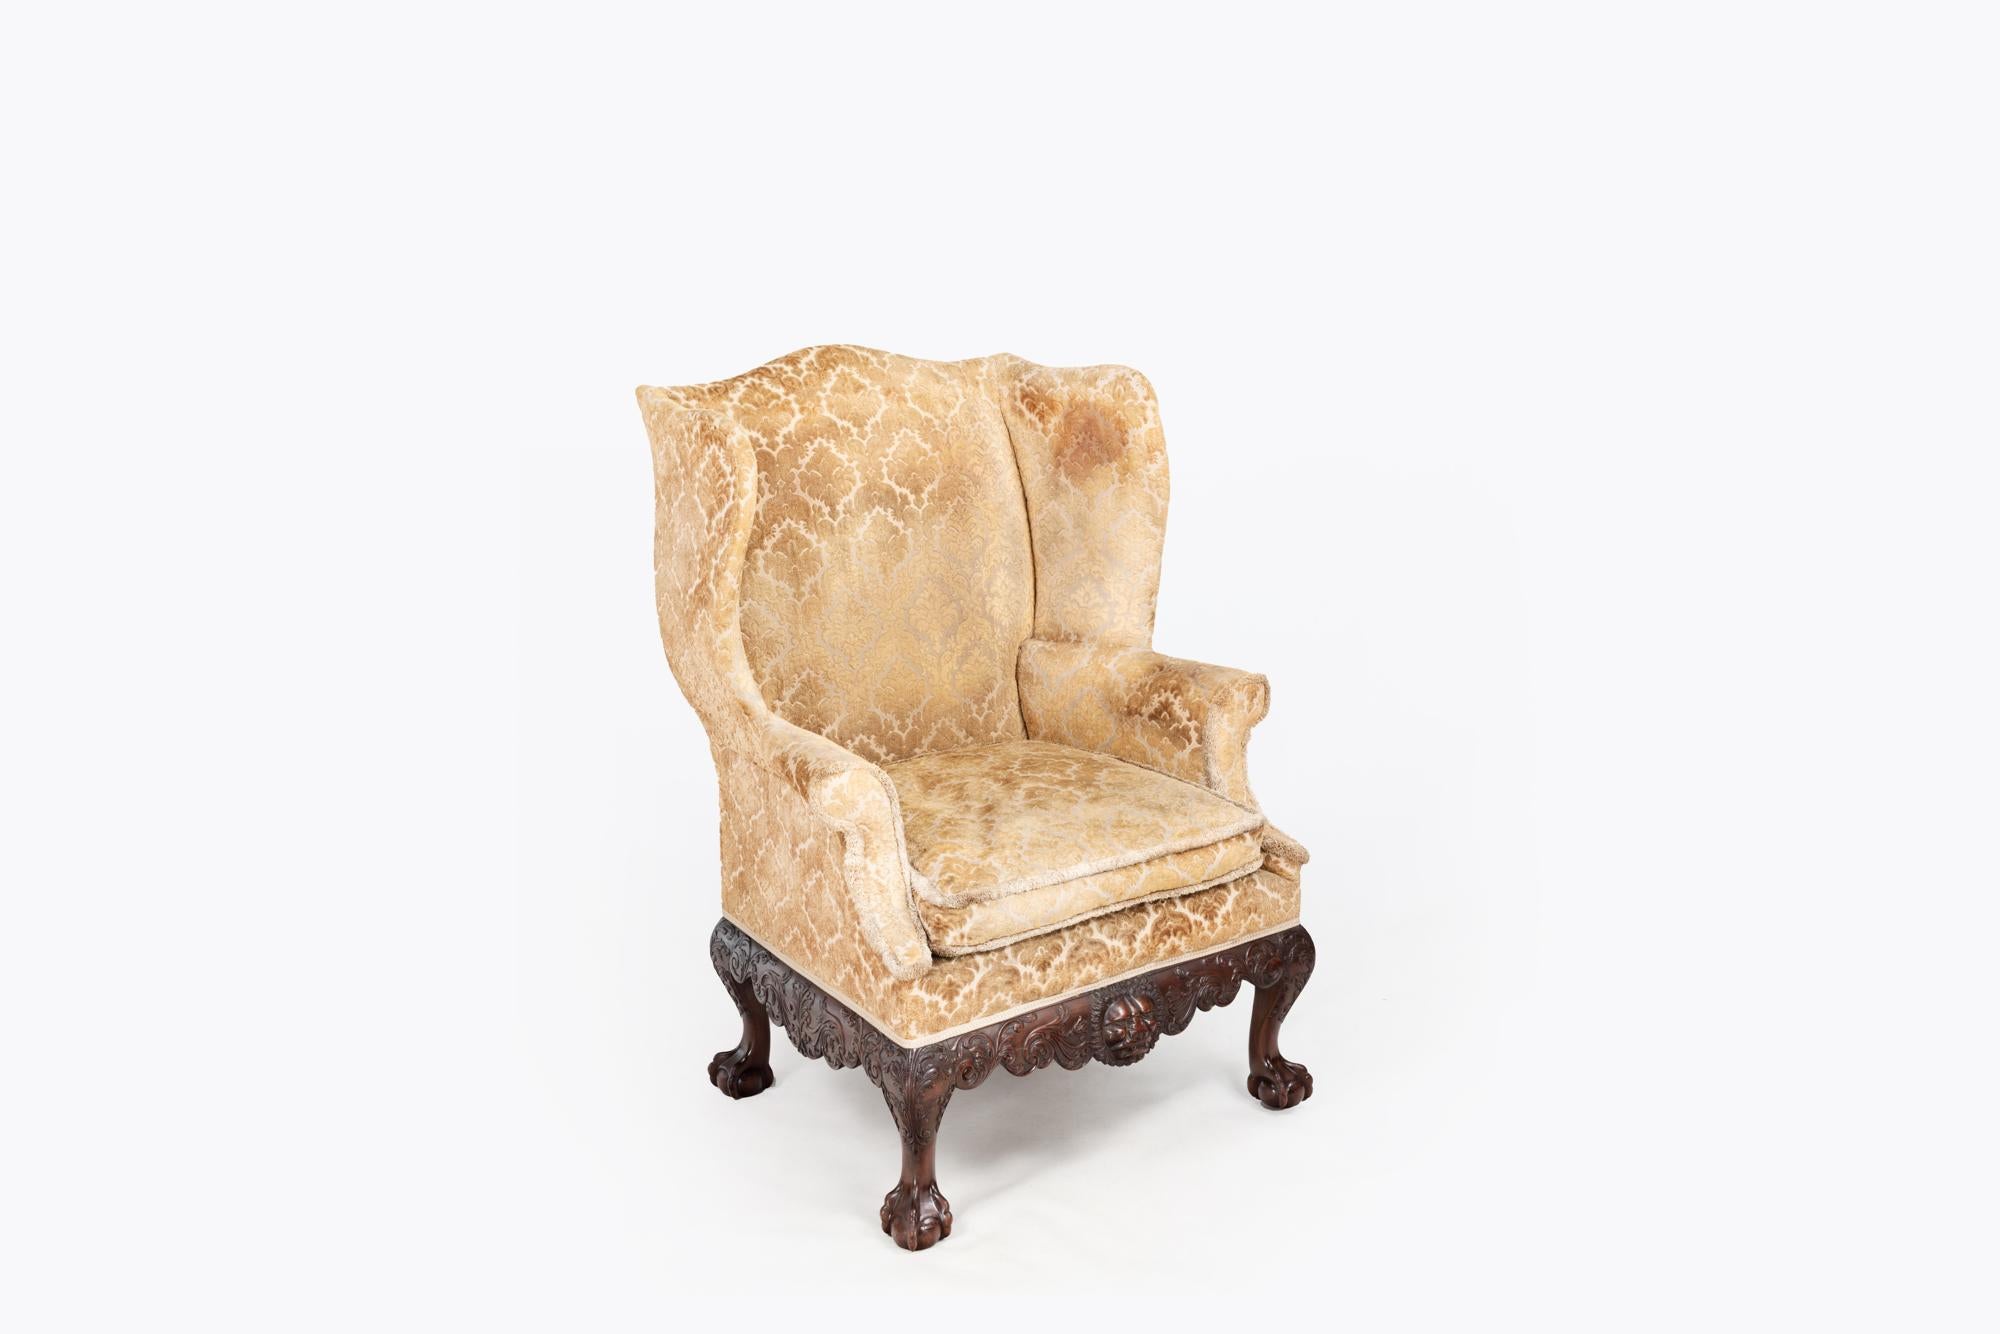 18th Century Irish wing chair ornately carved mahogany apron with scrolling foliate and central lion head motif. Supported on cabriole legs terminating in ball & claw feet.